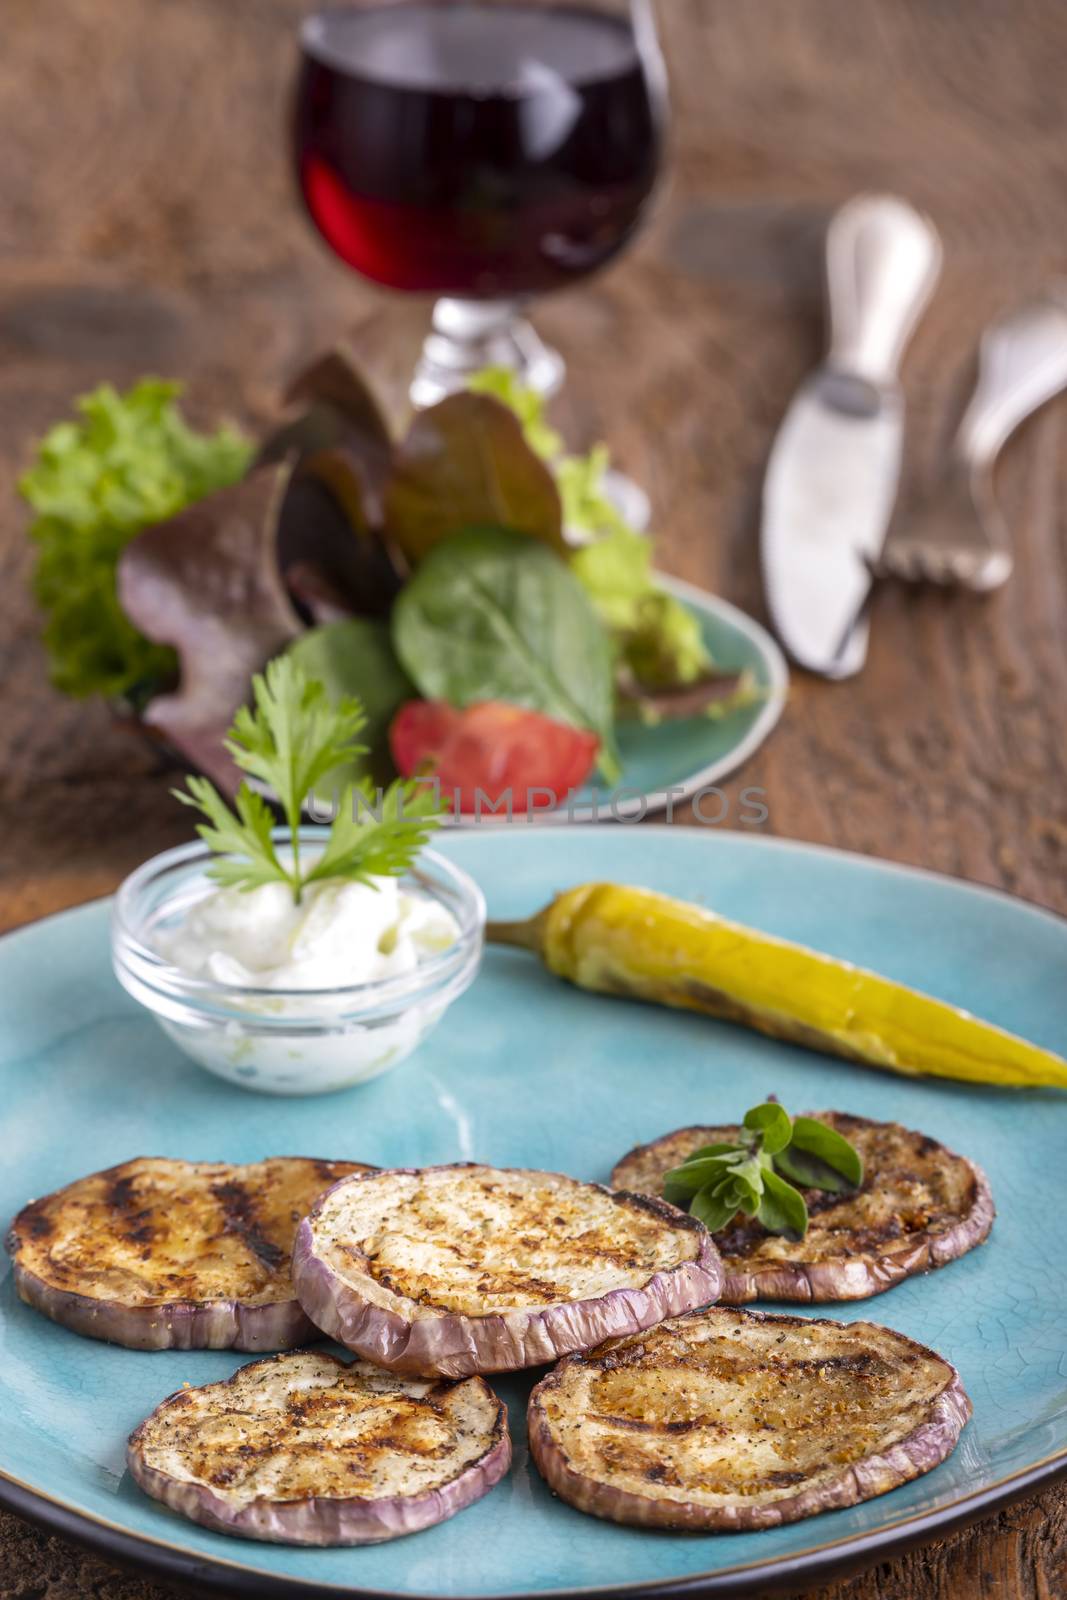 grilled eggplant by bernjuer